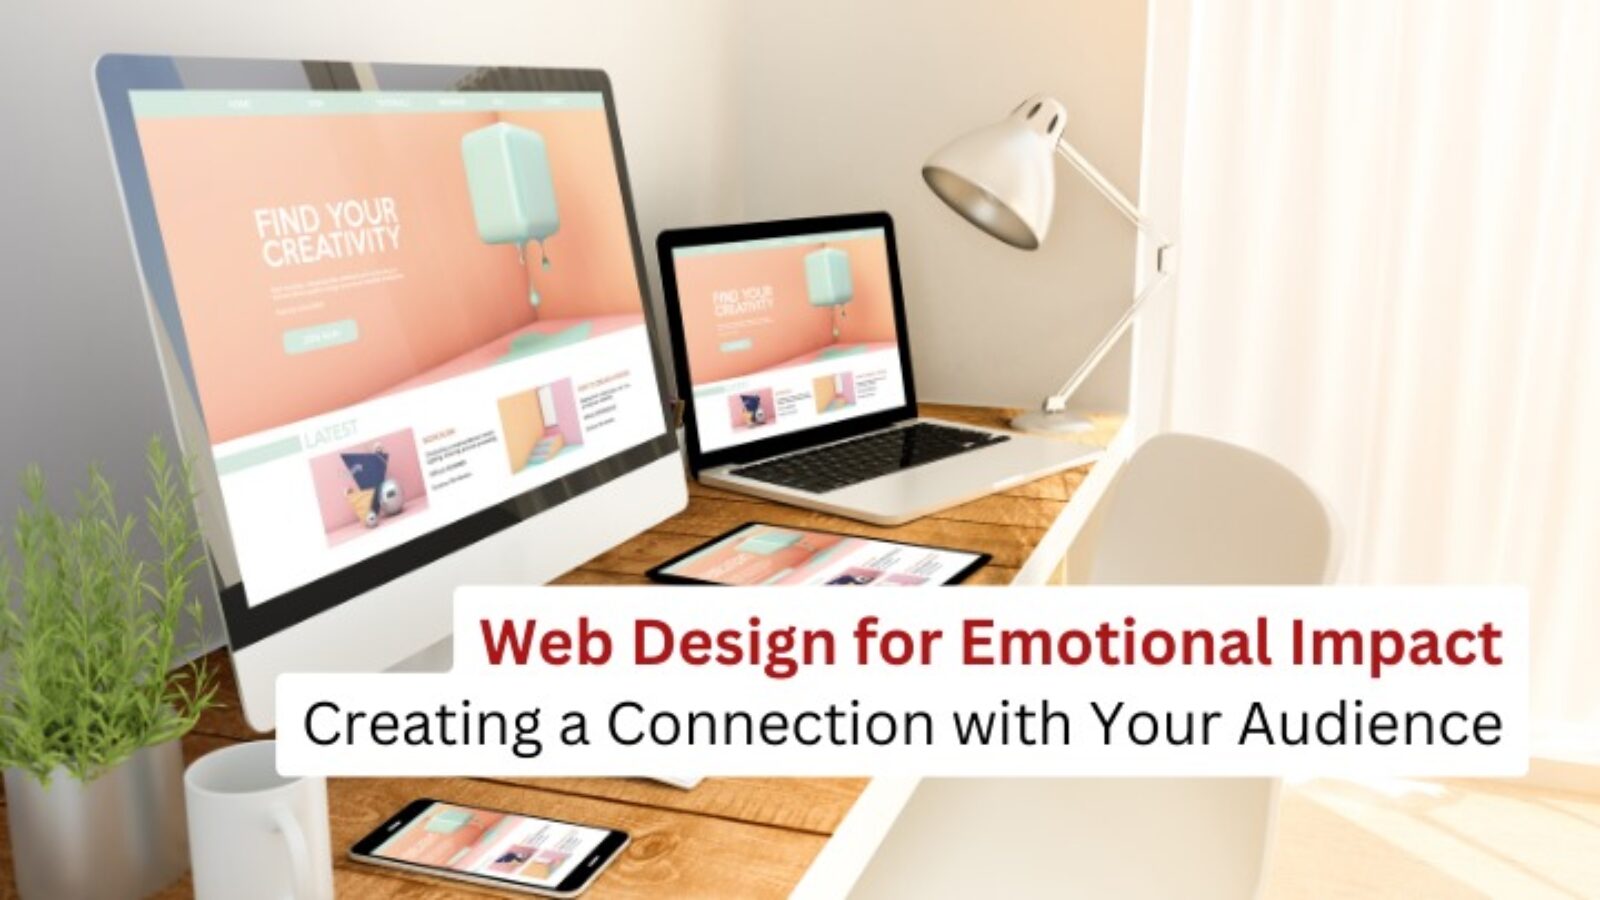 Web Design Creating a Connection with Your Audience